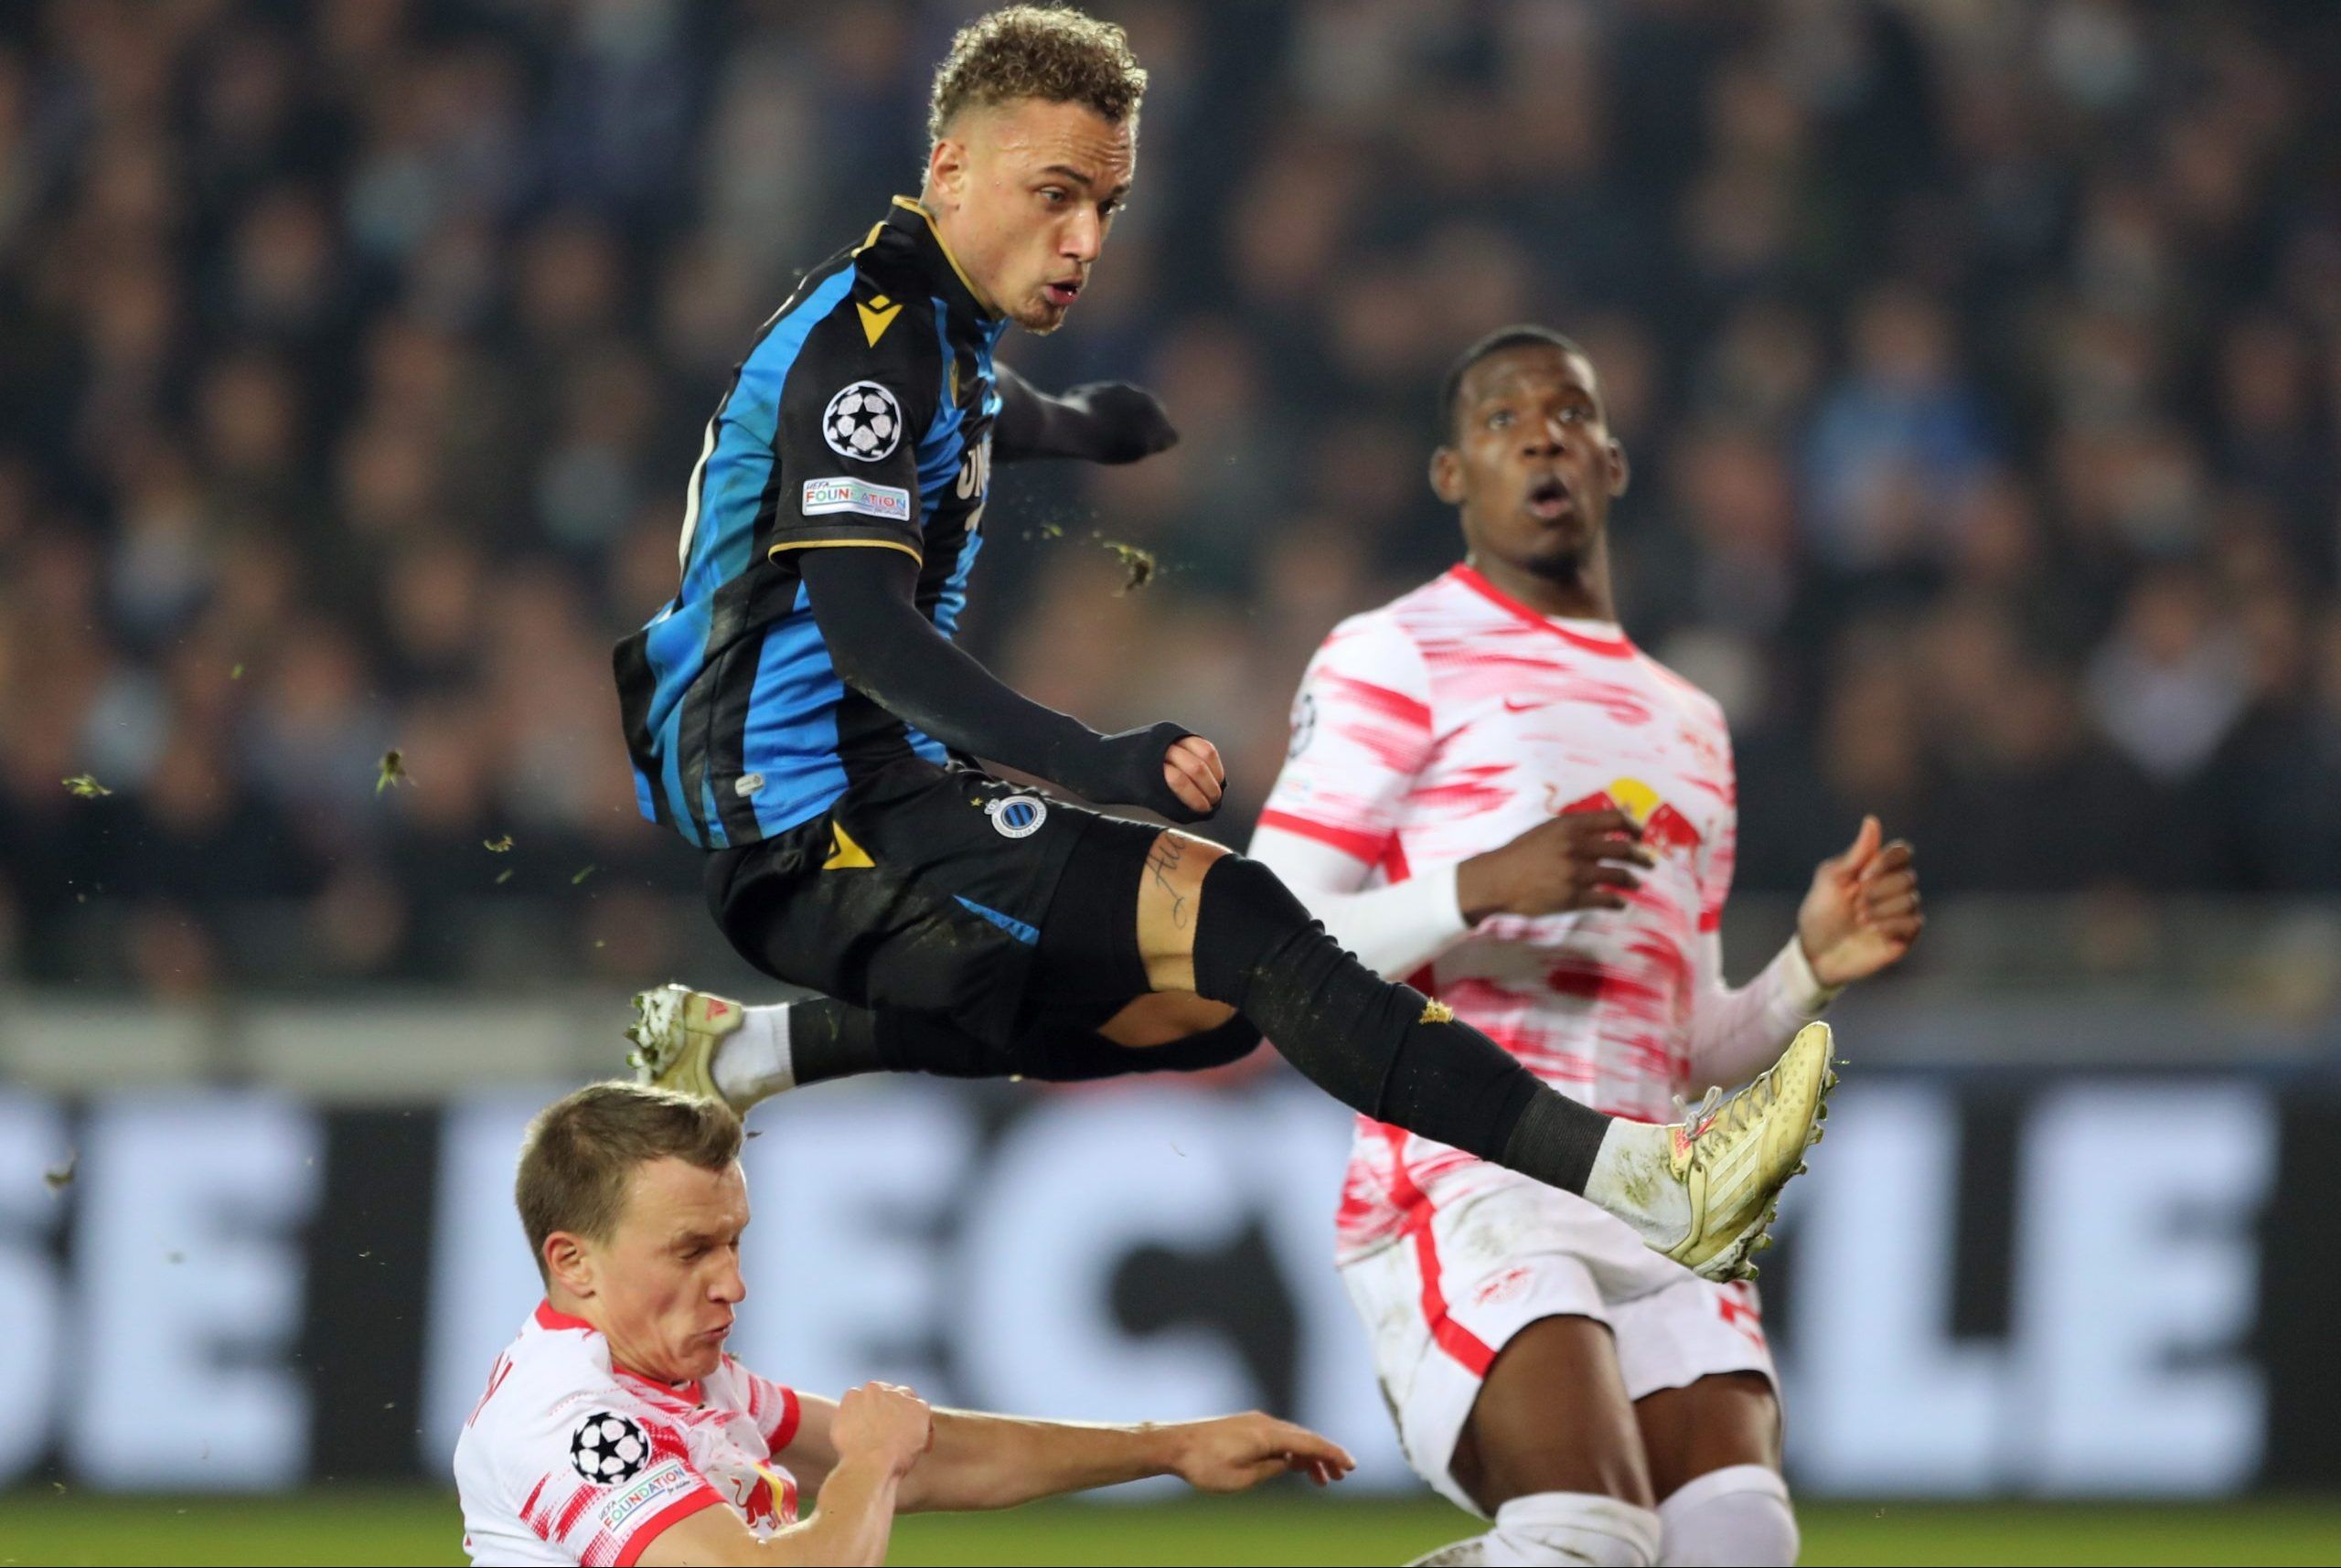 Soccer Football - Champions League - Group A - Club Brugge v RB Leipzig - Jan Breydel Stadium, Bruges, Belgium - November 24, 2021 Club Brugge's Noa Lang in action with RB Leipzig's Lukas Klostermann REUTERS/Pascal Rossignol